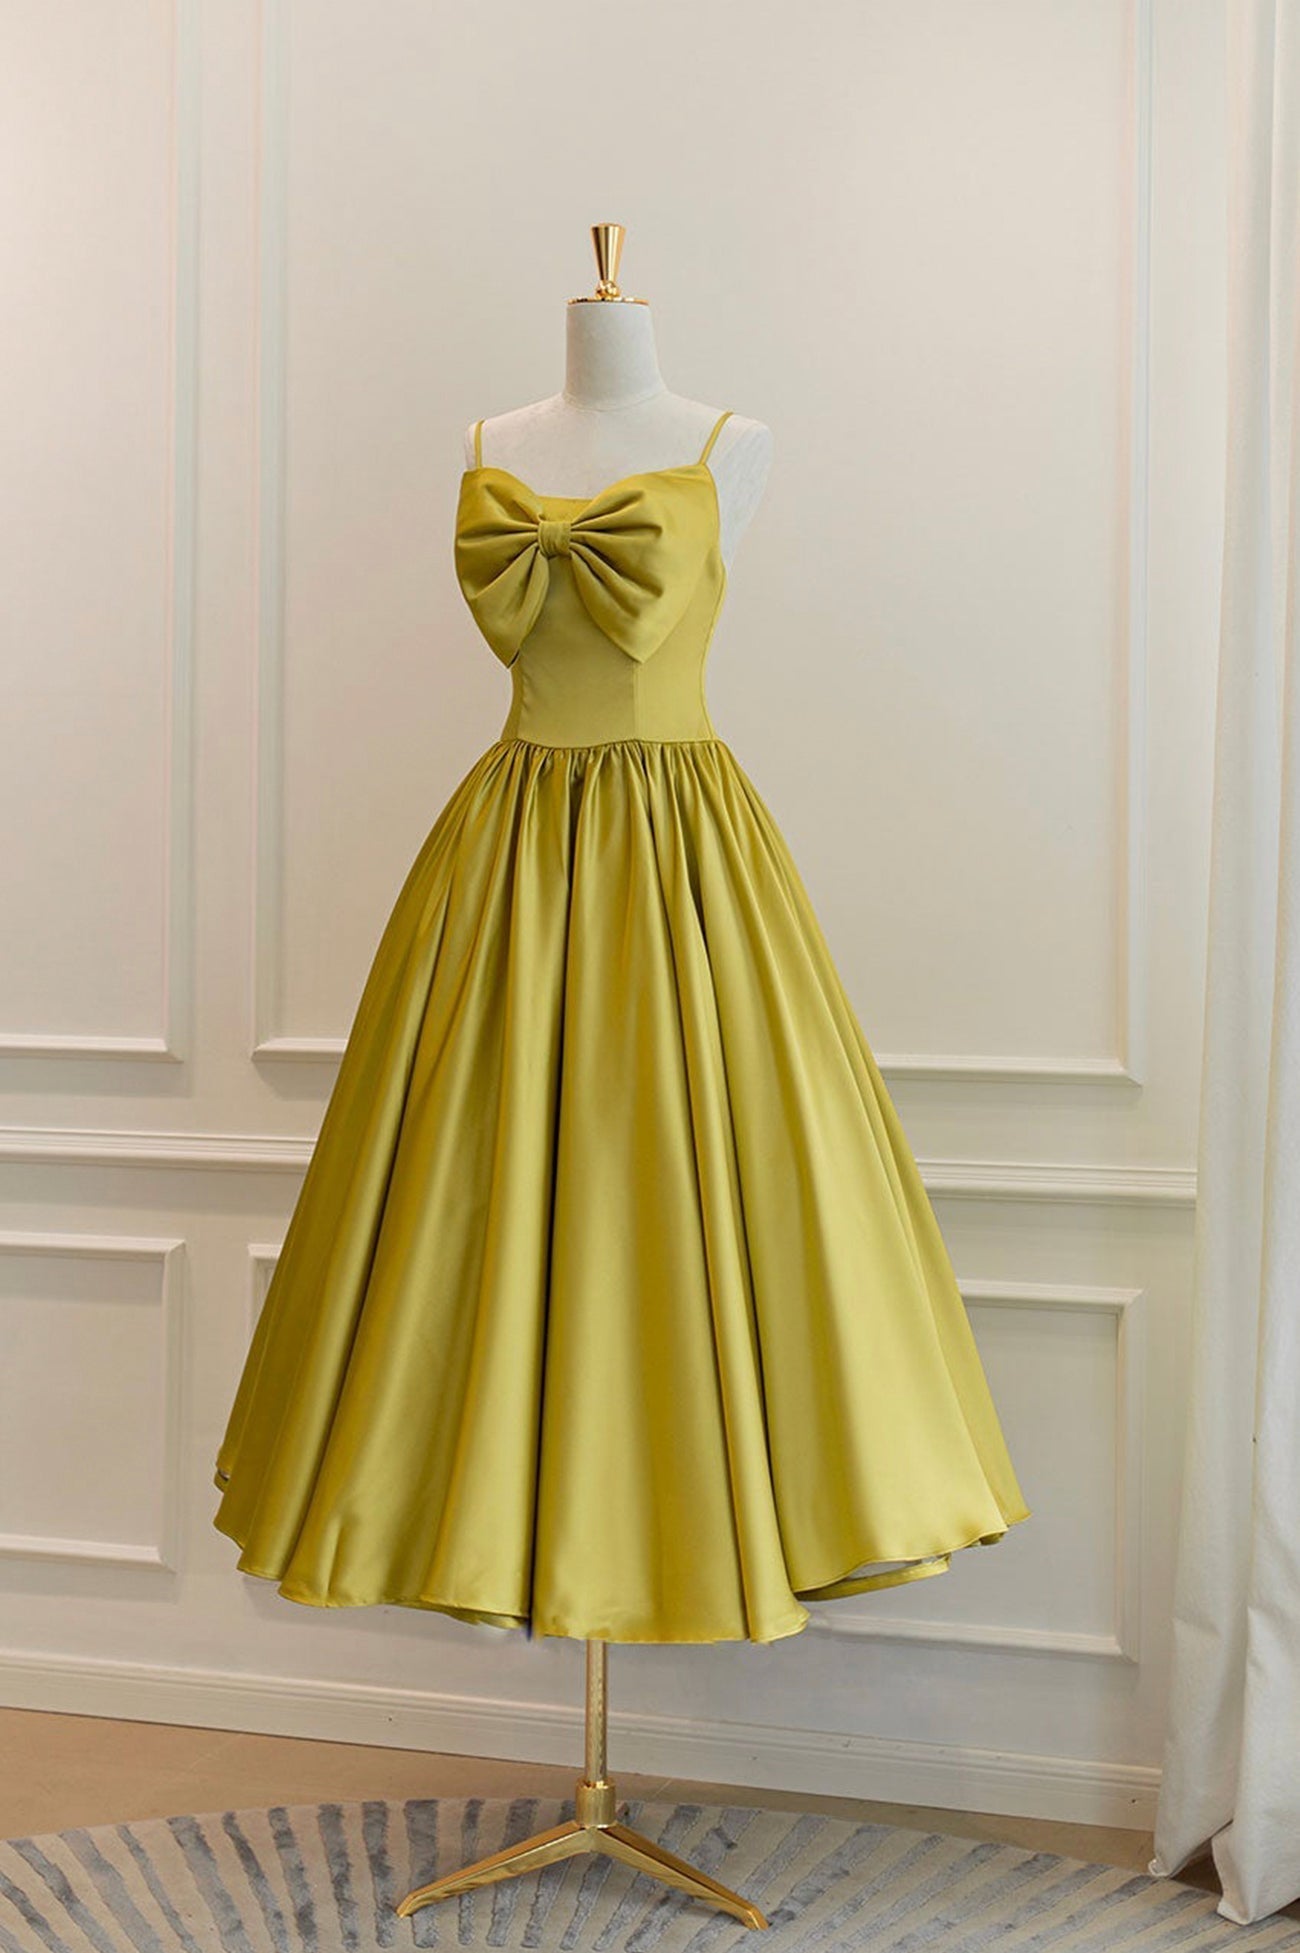 Sparklie Dress, Yellow Satin Short Prom Dresses, Cute A-Line Bow Homecoming Dresses